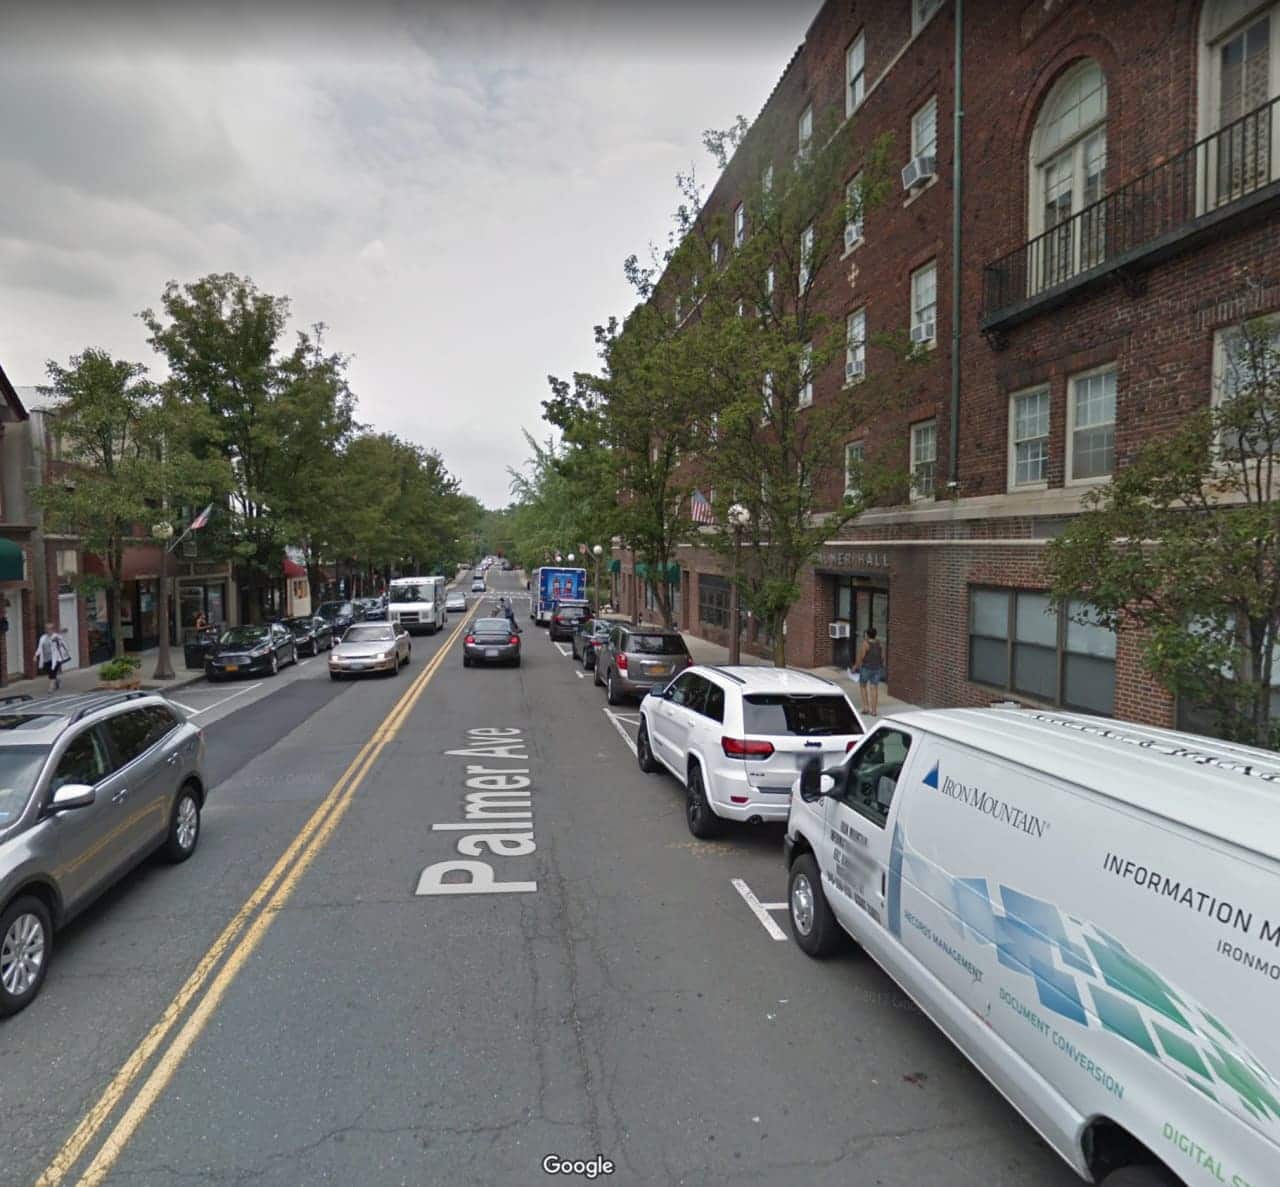 A man allegedly exposed himself to a woman walking on Palmer Avenue in Bronxville.